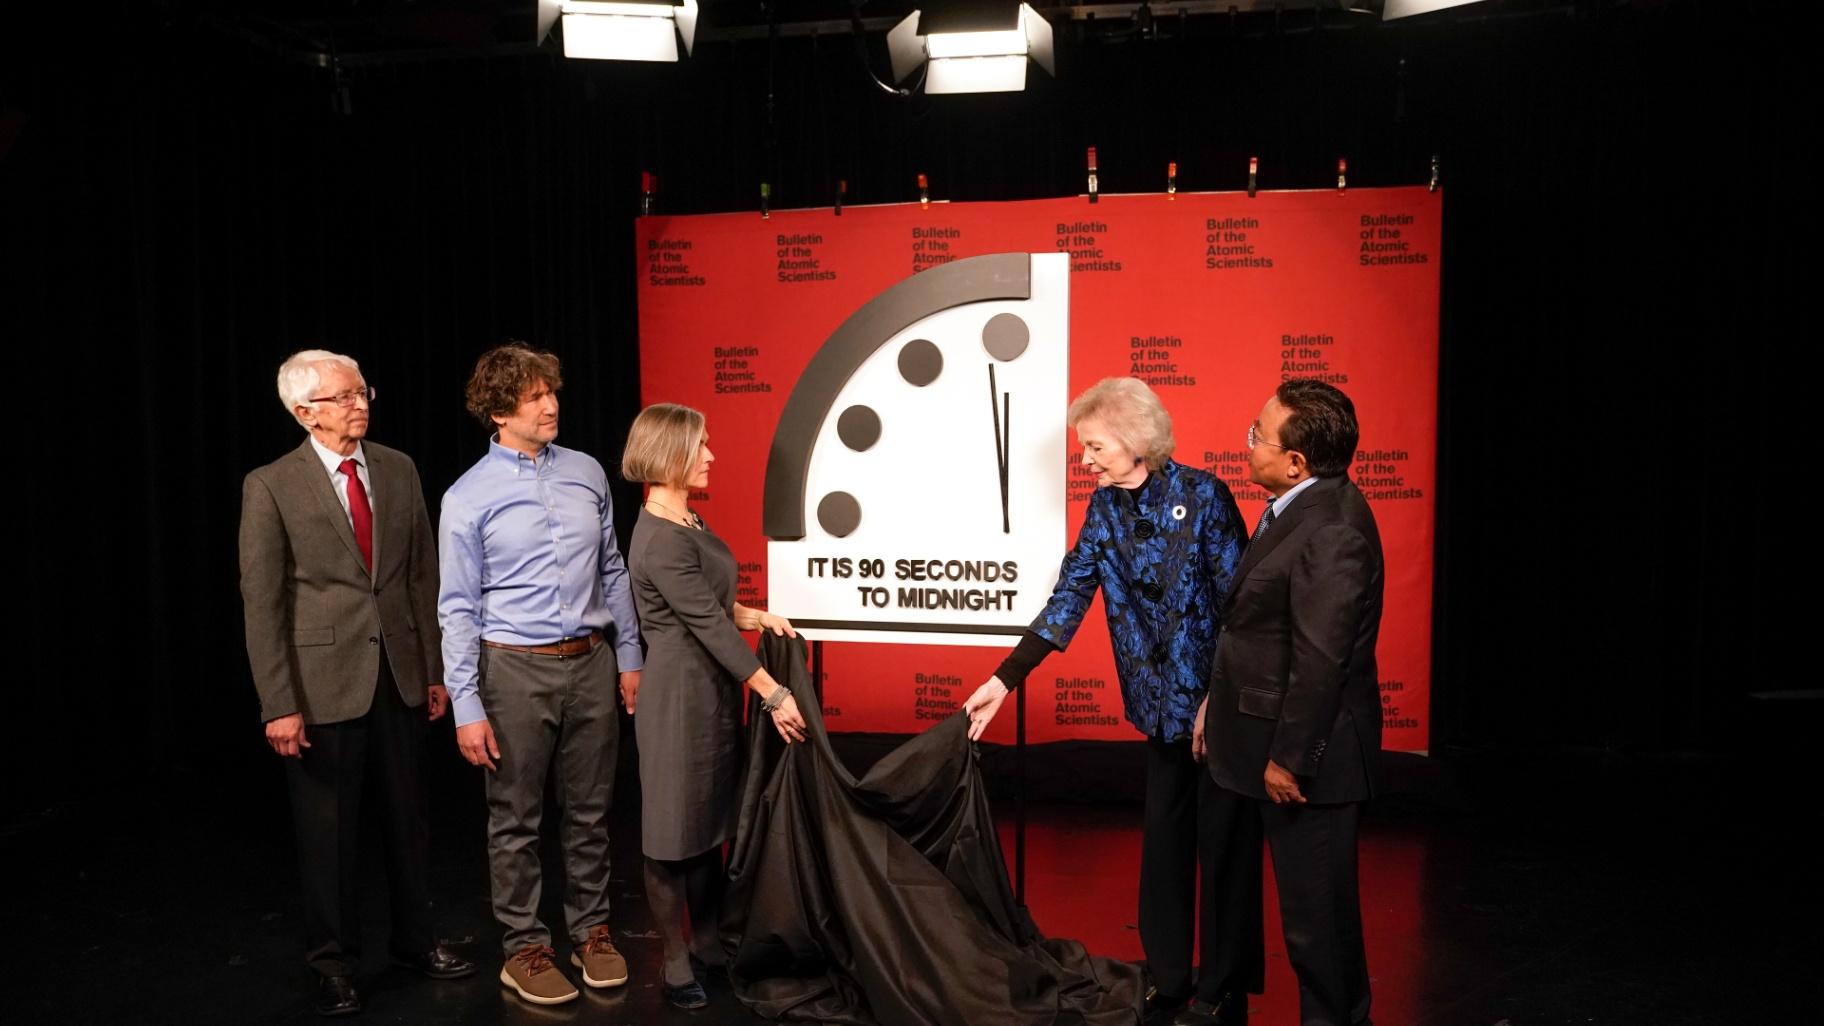 Siegfried Hecker, from left, Daniel Holz, Sharon Squassoni, Mary Robinson and Elbegdorj Tsakhia with the Bulletin of the Atomic Scientists, remove a cloth covering the Doomsday Clock before a virtual news conference at the National Press Club in Washington, Tuesday, Jan. 24, 2023. (AP Photo / Patrick Semansky)